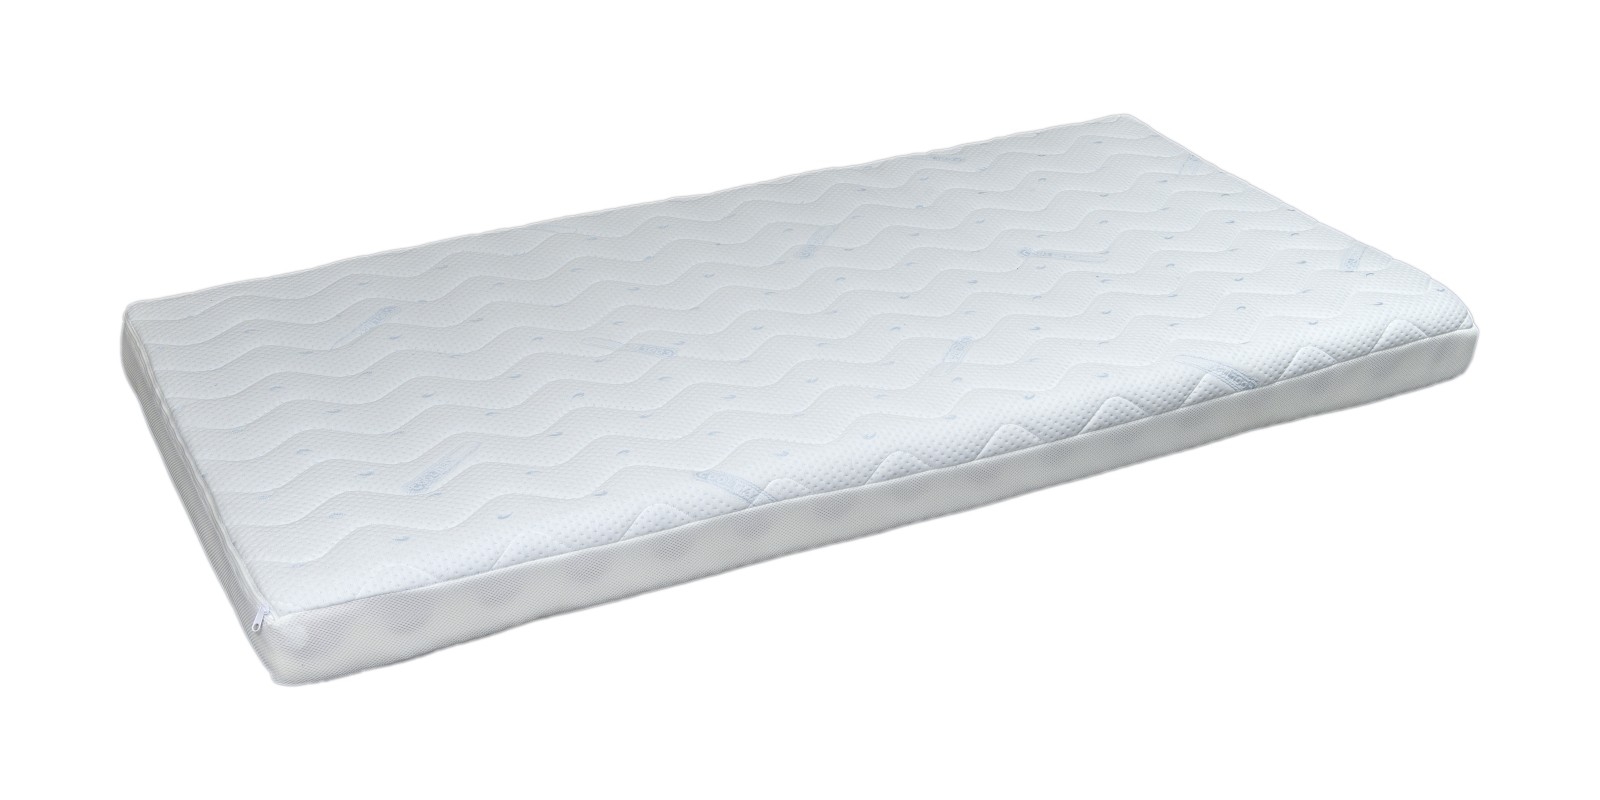 foam mattress for young child